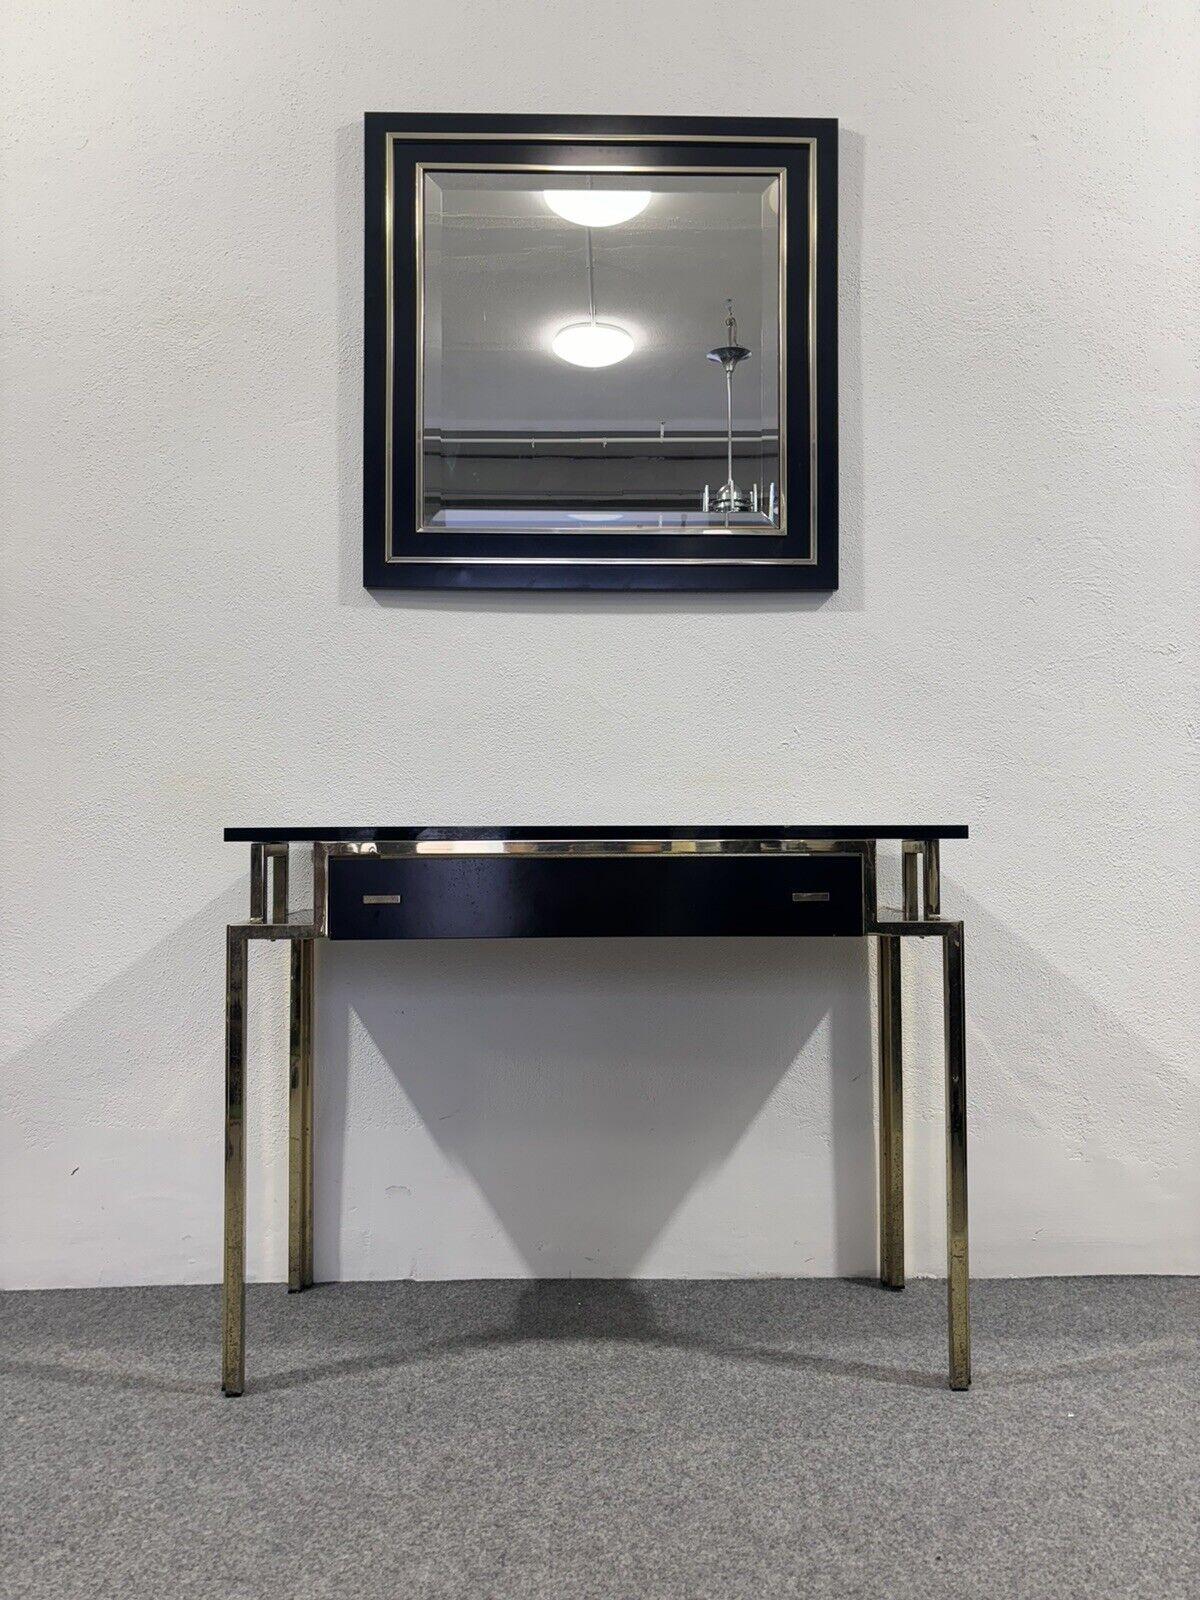 Romeo Rega Style Console Mirror Design Hollywood Regency Modernism 1970's.

Gold metal frame and black lacquered wood.

Item is in good vintage conservative condition, signs of time present due to use and age. (Please see photos)

Mirror 80x80